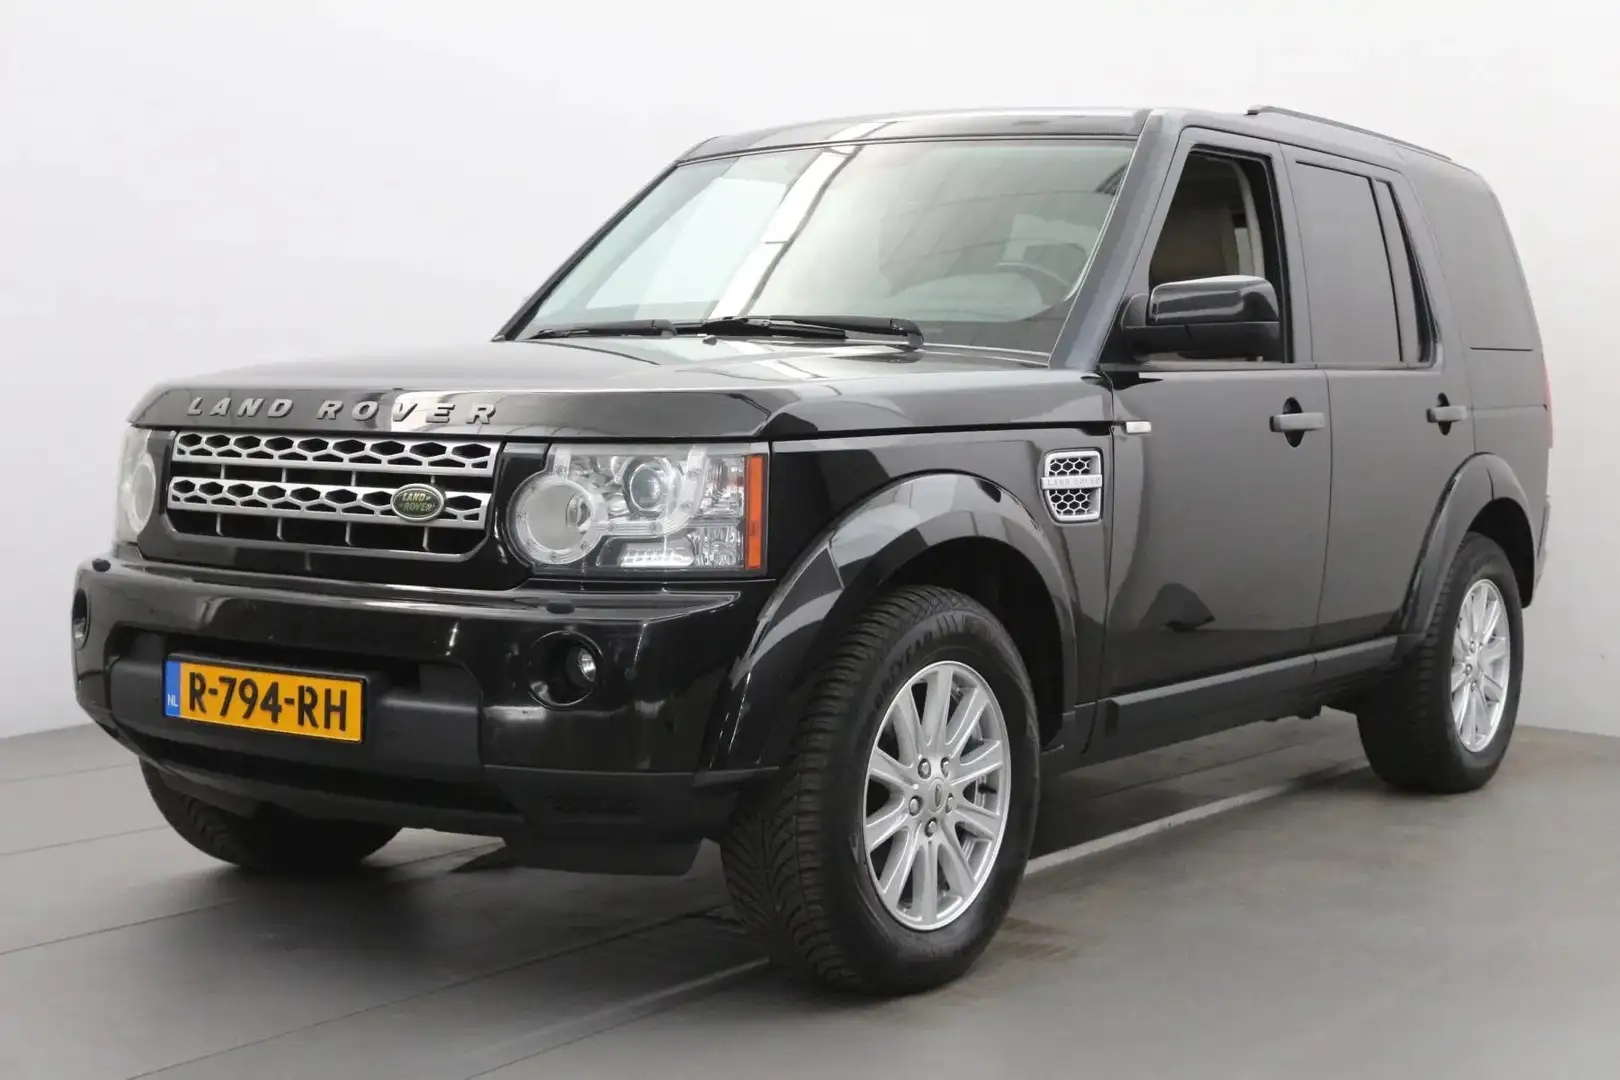 Land Rover Discovery 4 DISCOVERY 4 Black - 1